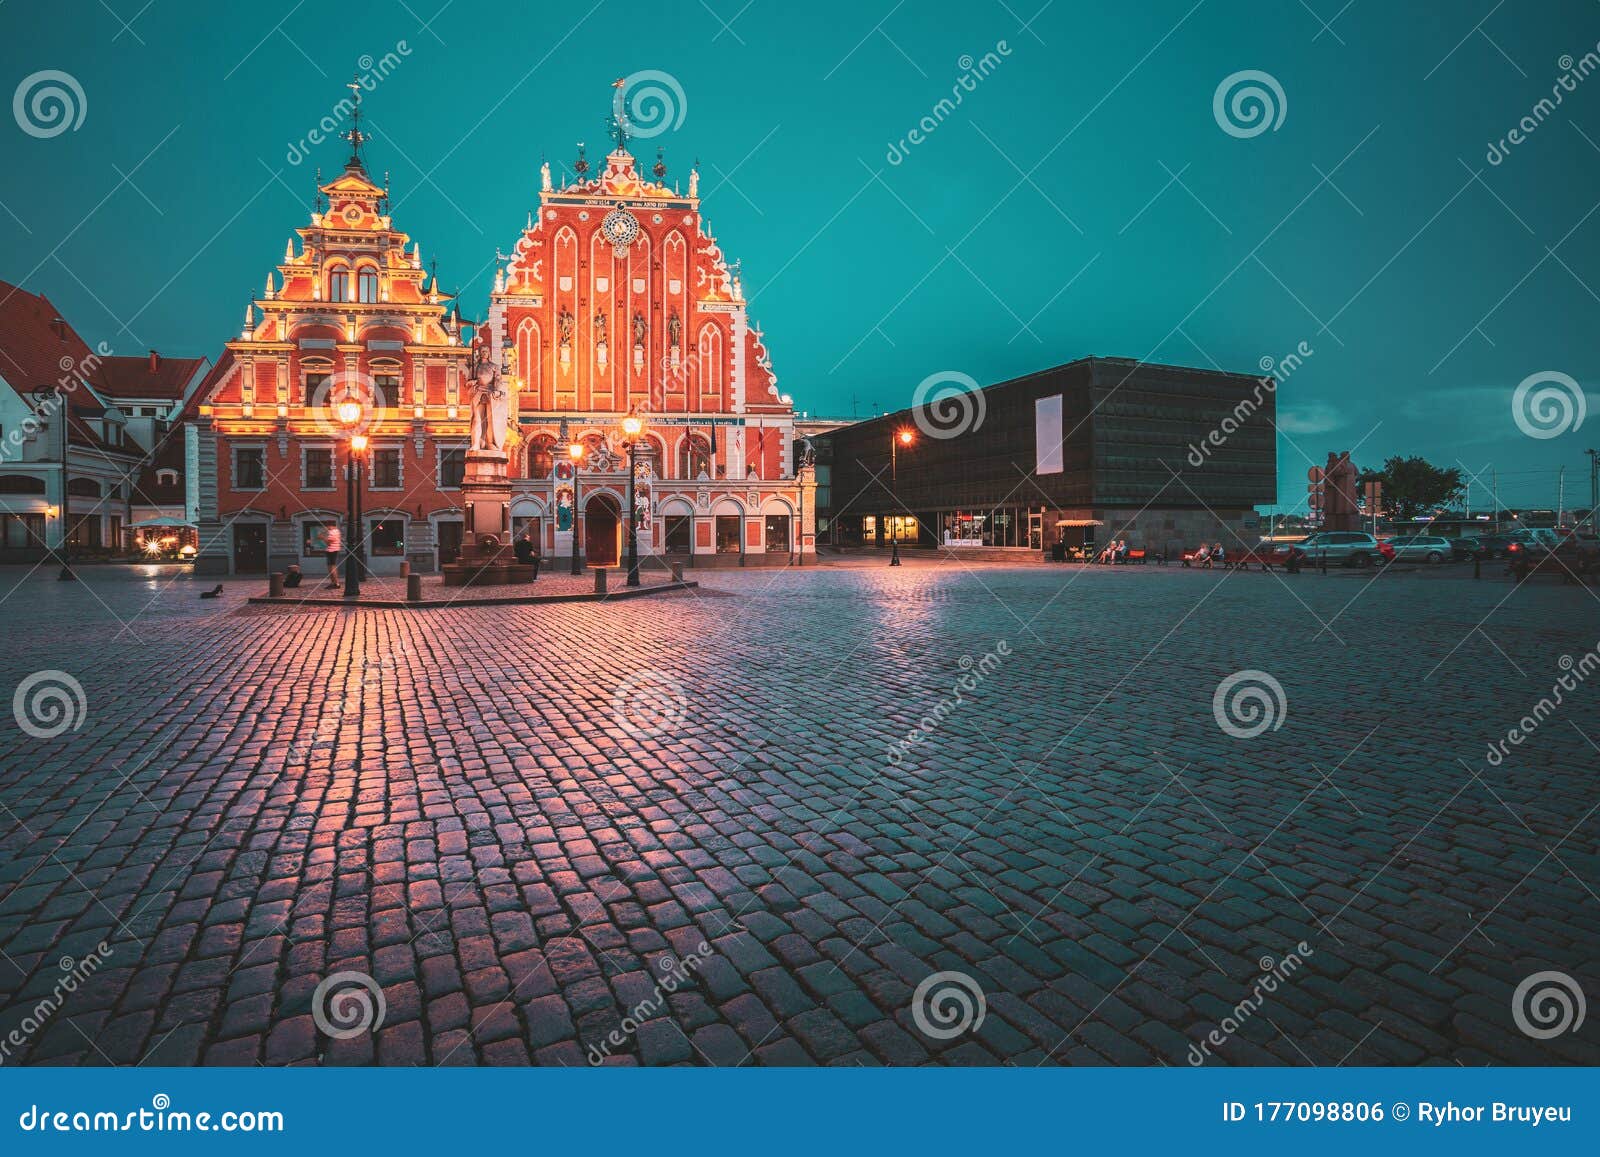 riga, latvia. schwabe house and house of the blackheads at town hall square, ancient historical landmark and popular